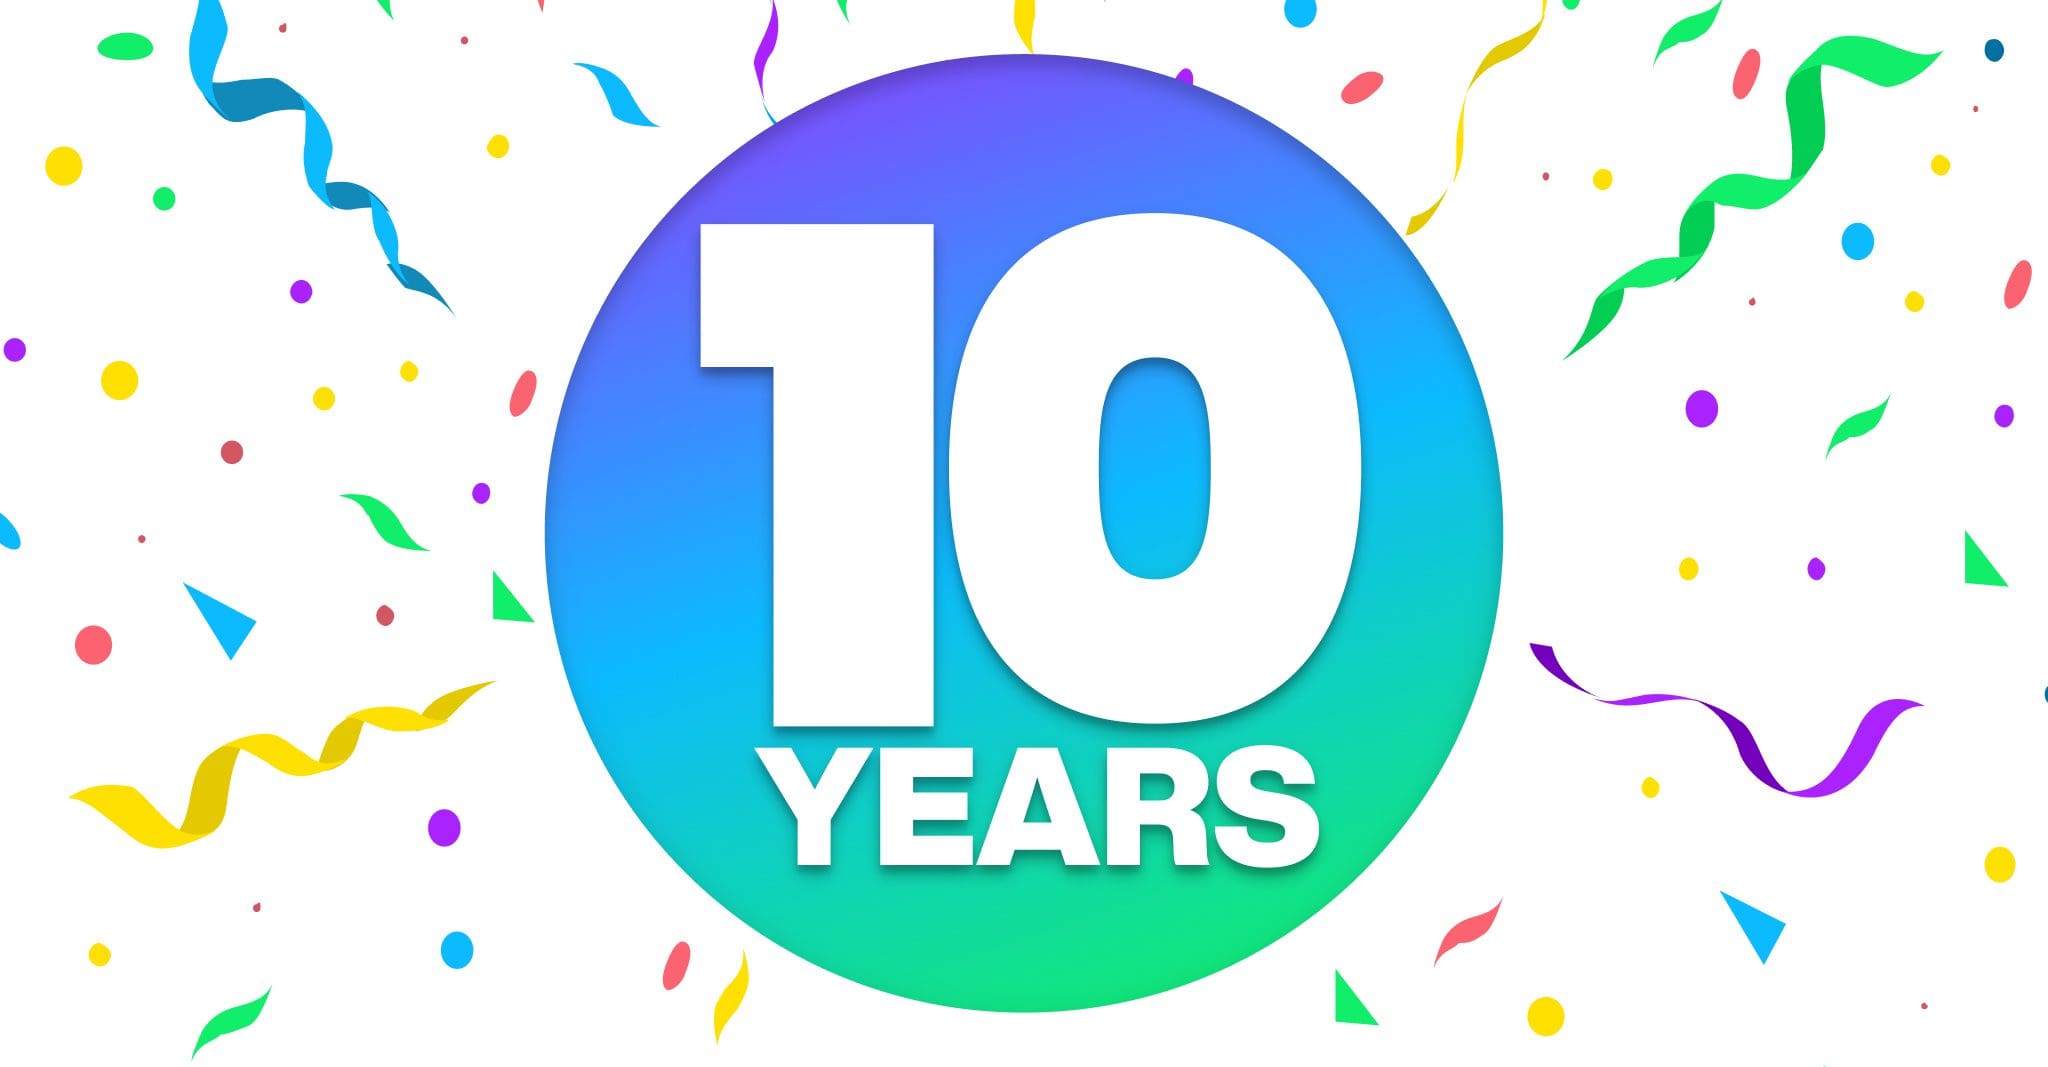 10 years of LifeStreet with confetti